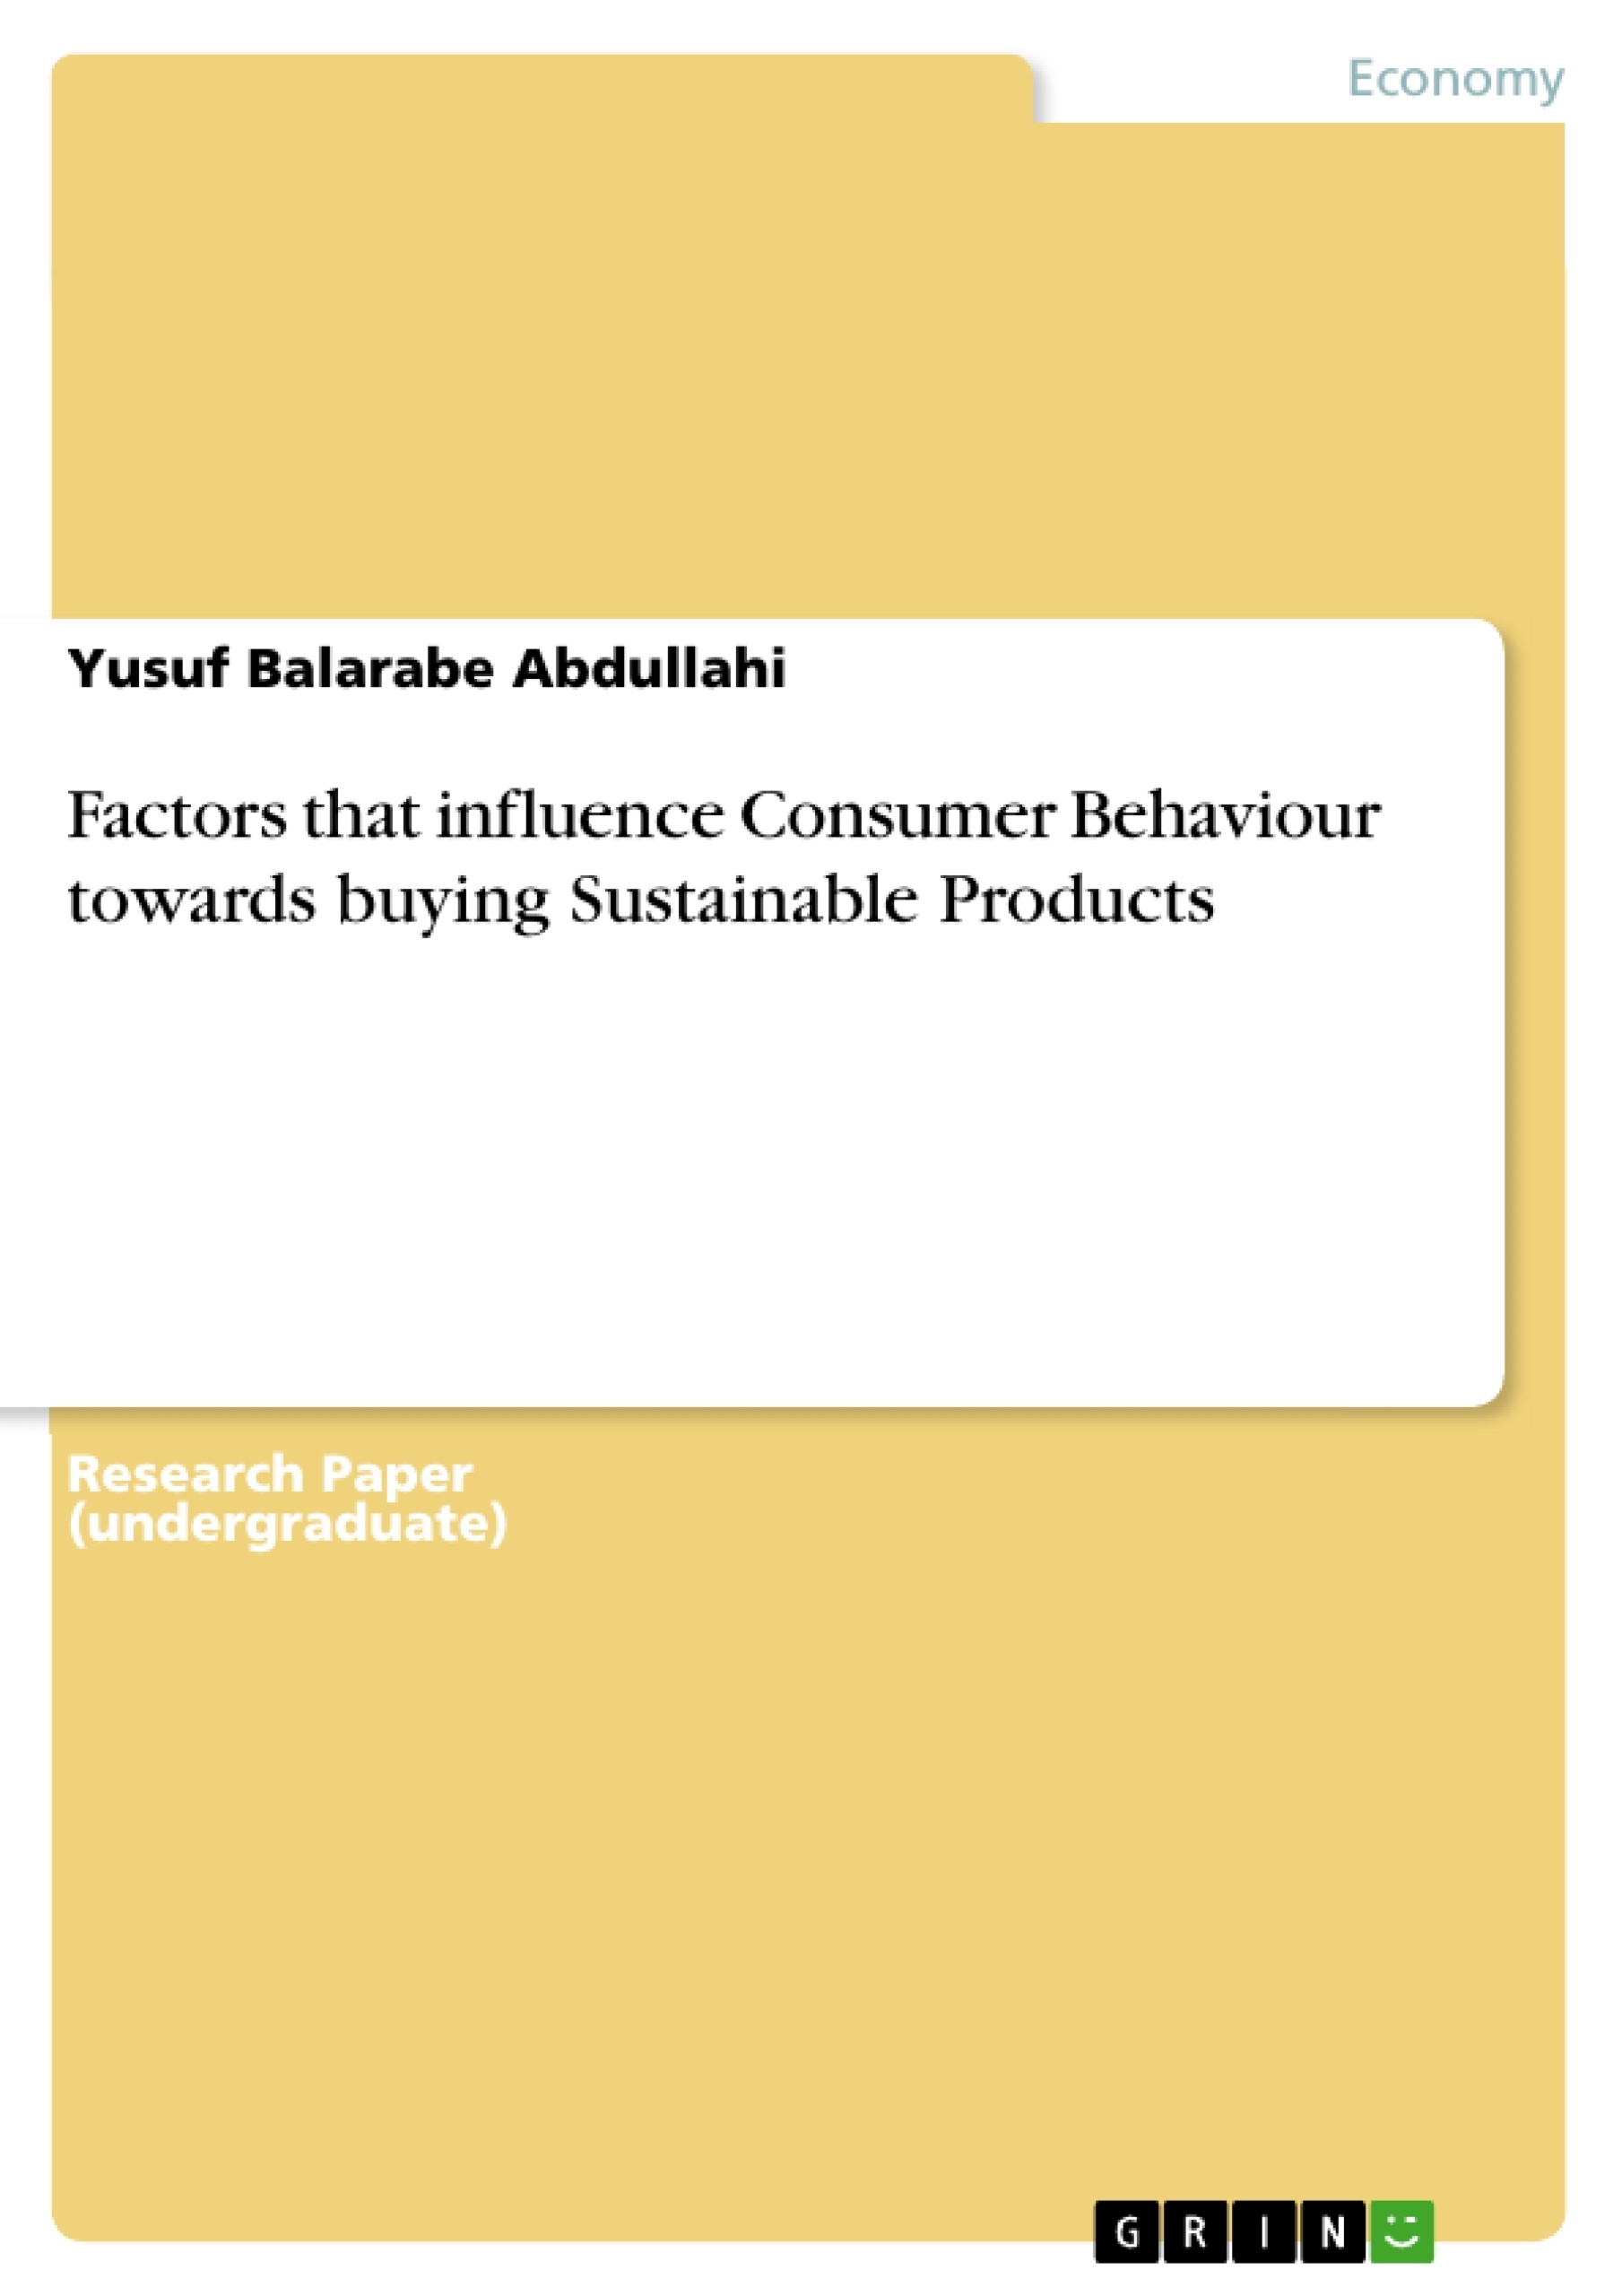 Title: Factors that influence Consumer Behaviour towards buying Sustainable Products